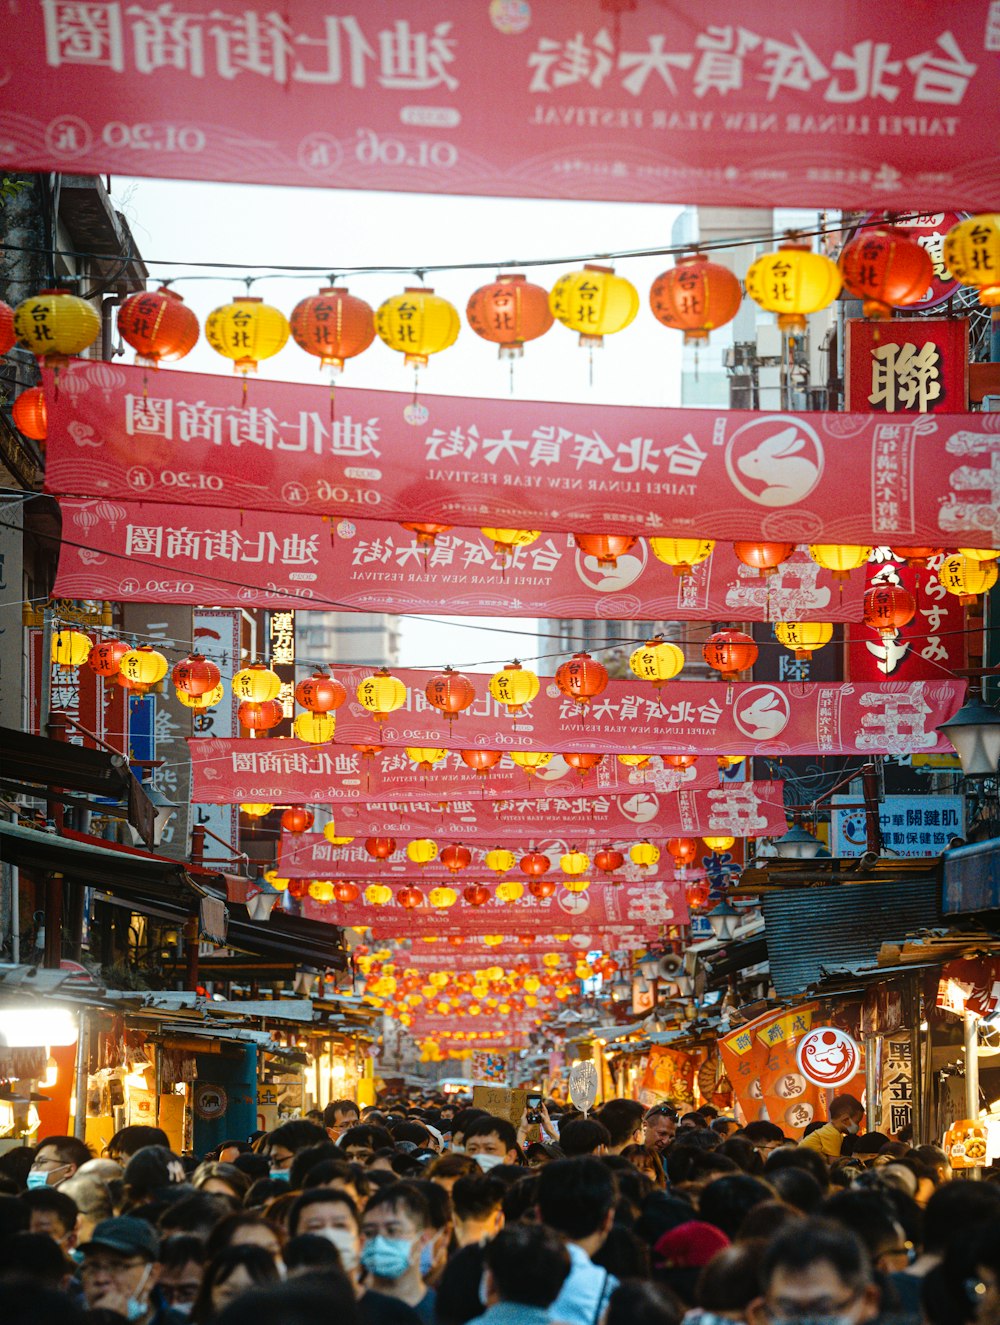 a crowd of people walking down a street under red banners